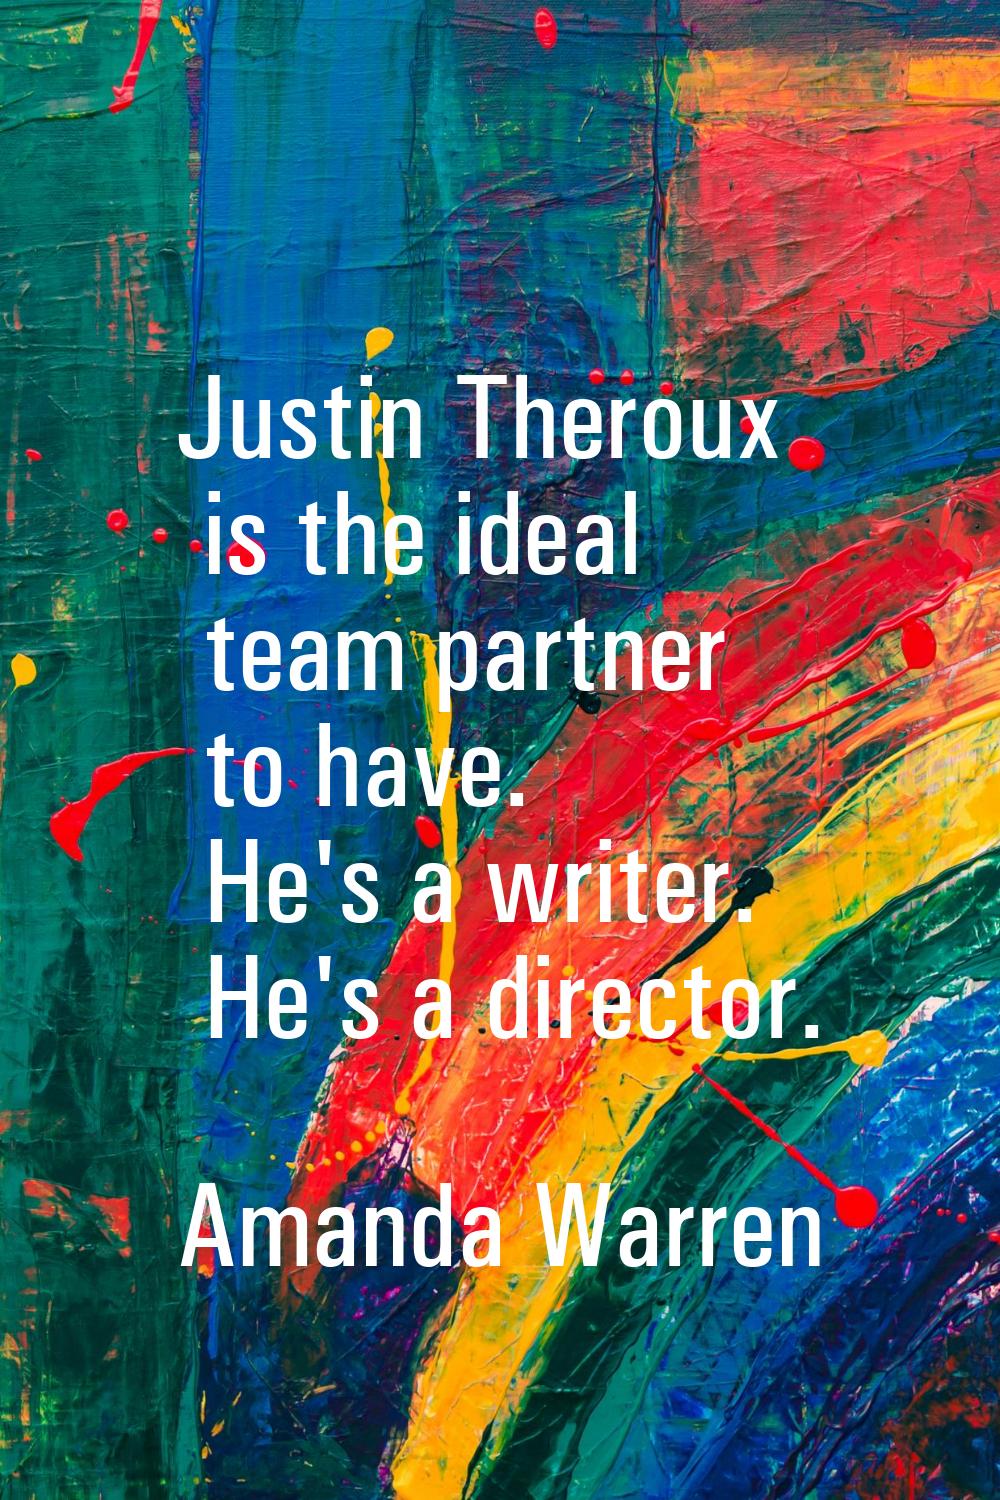 Justin Theroux is the ideal team partner to have. He's a writer. He's a director.